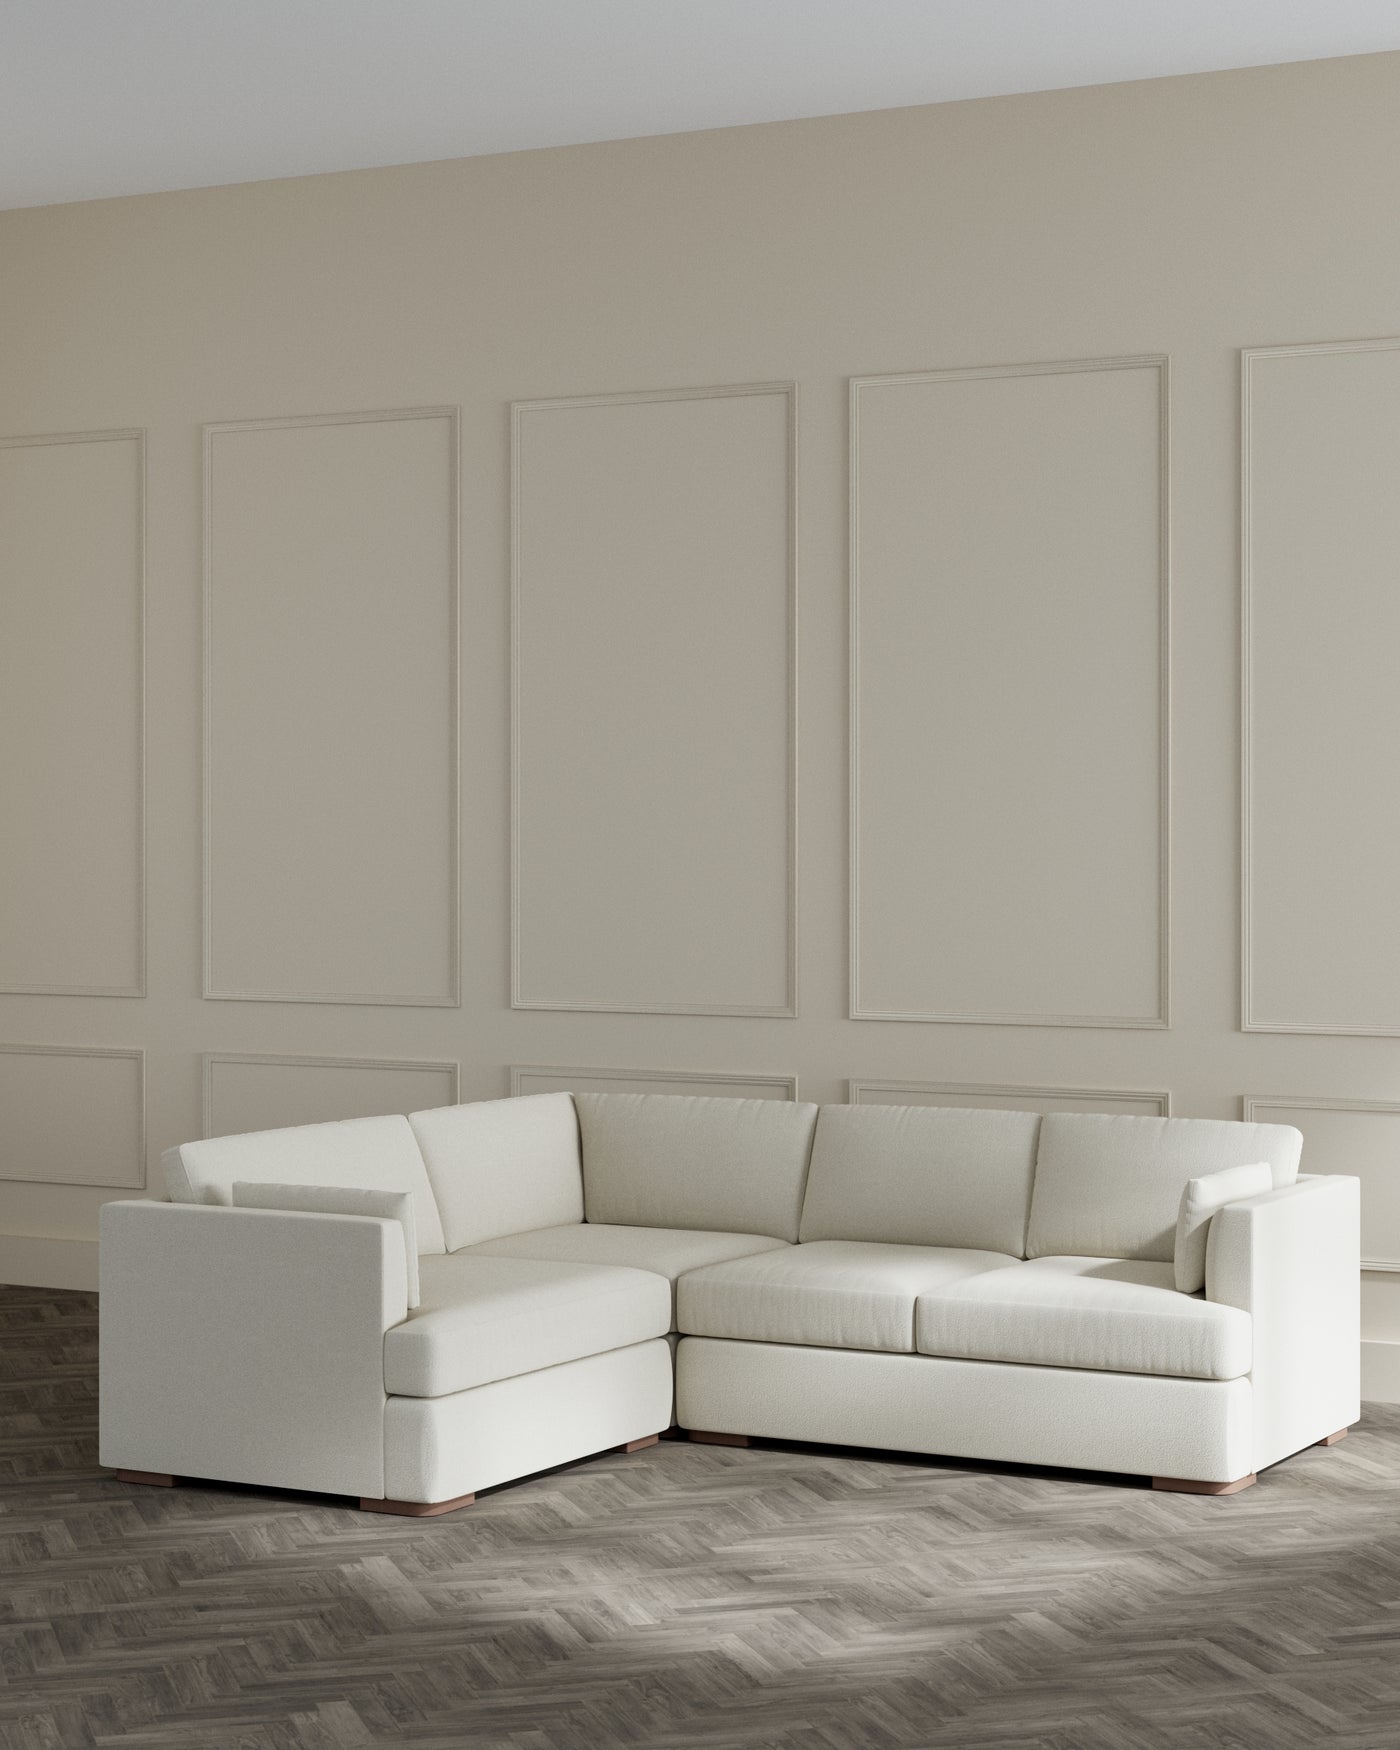 Elegant contemporary L-shaped sectional sofa with a neutral cream upholstery and a minimalist design, featuring clean lines, plush cushions, and low-profile armrests, set against a panelled wall on a herringbone wood floor.